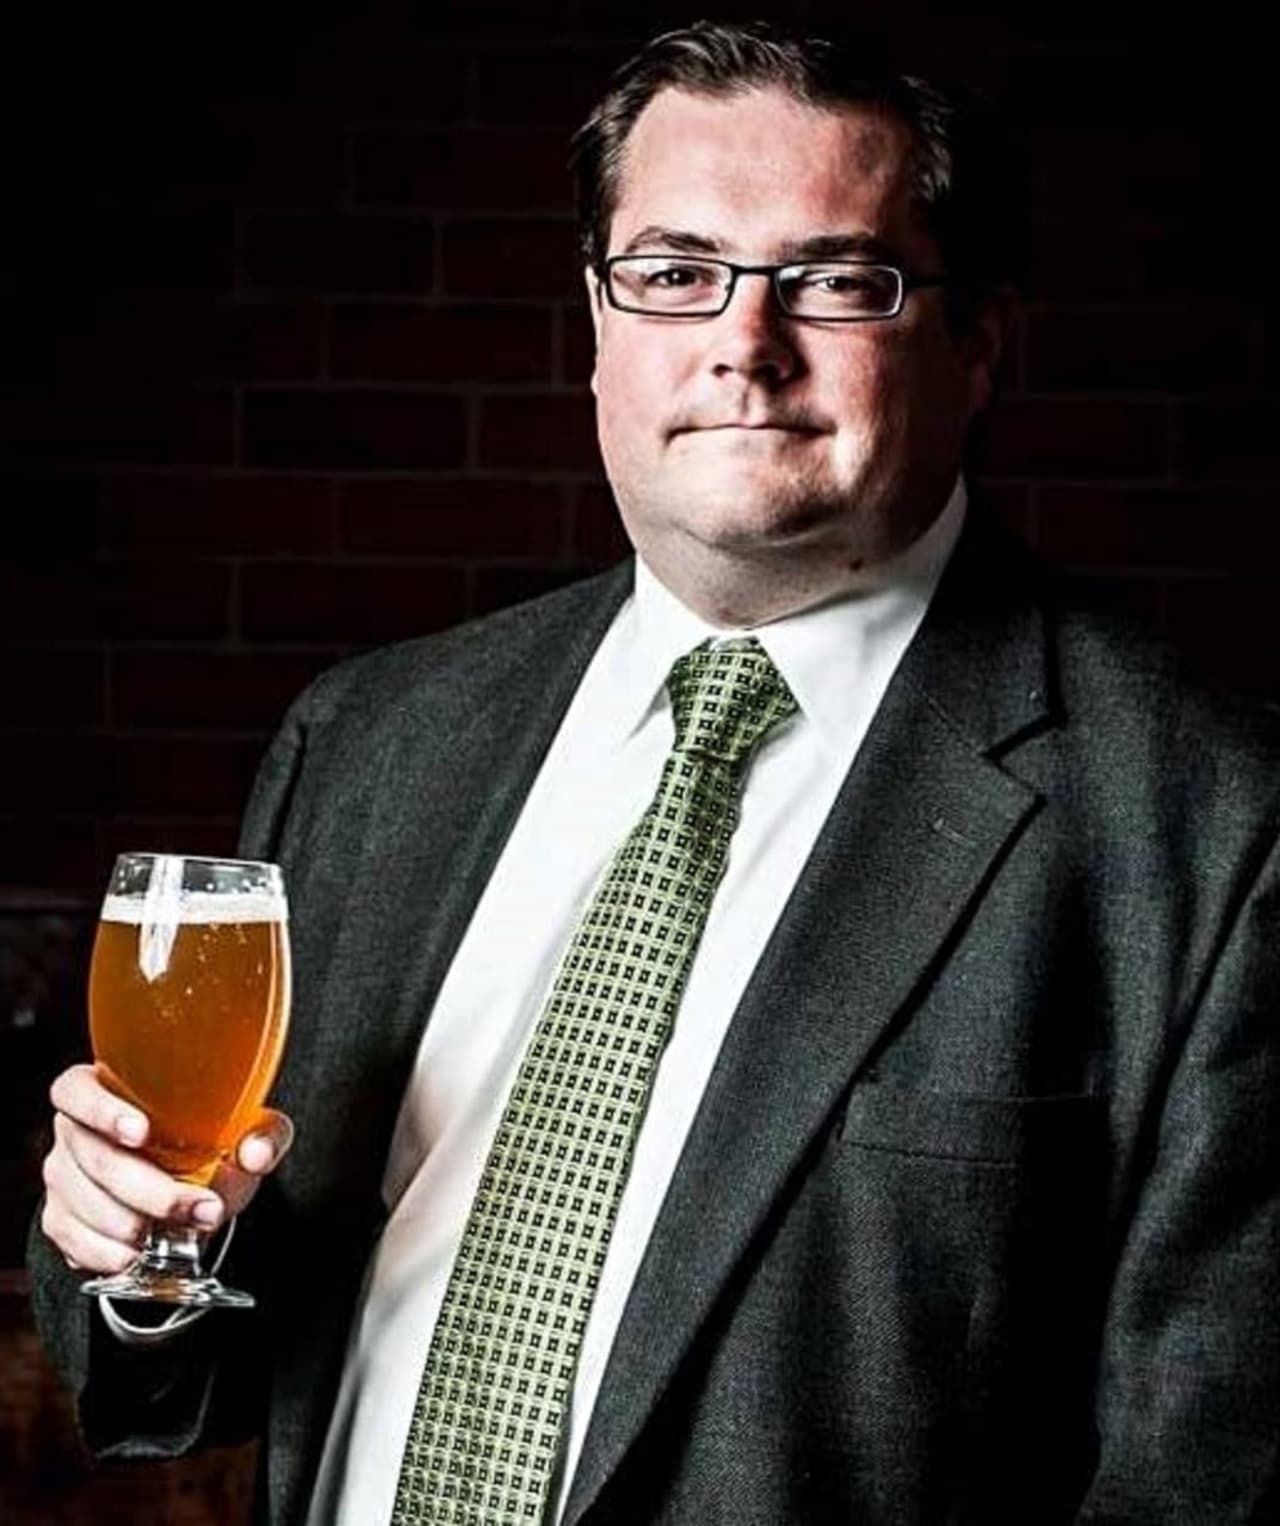 John Holl will share some of his extensive beer knowledge next month at the library.